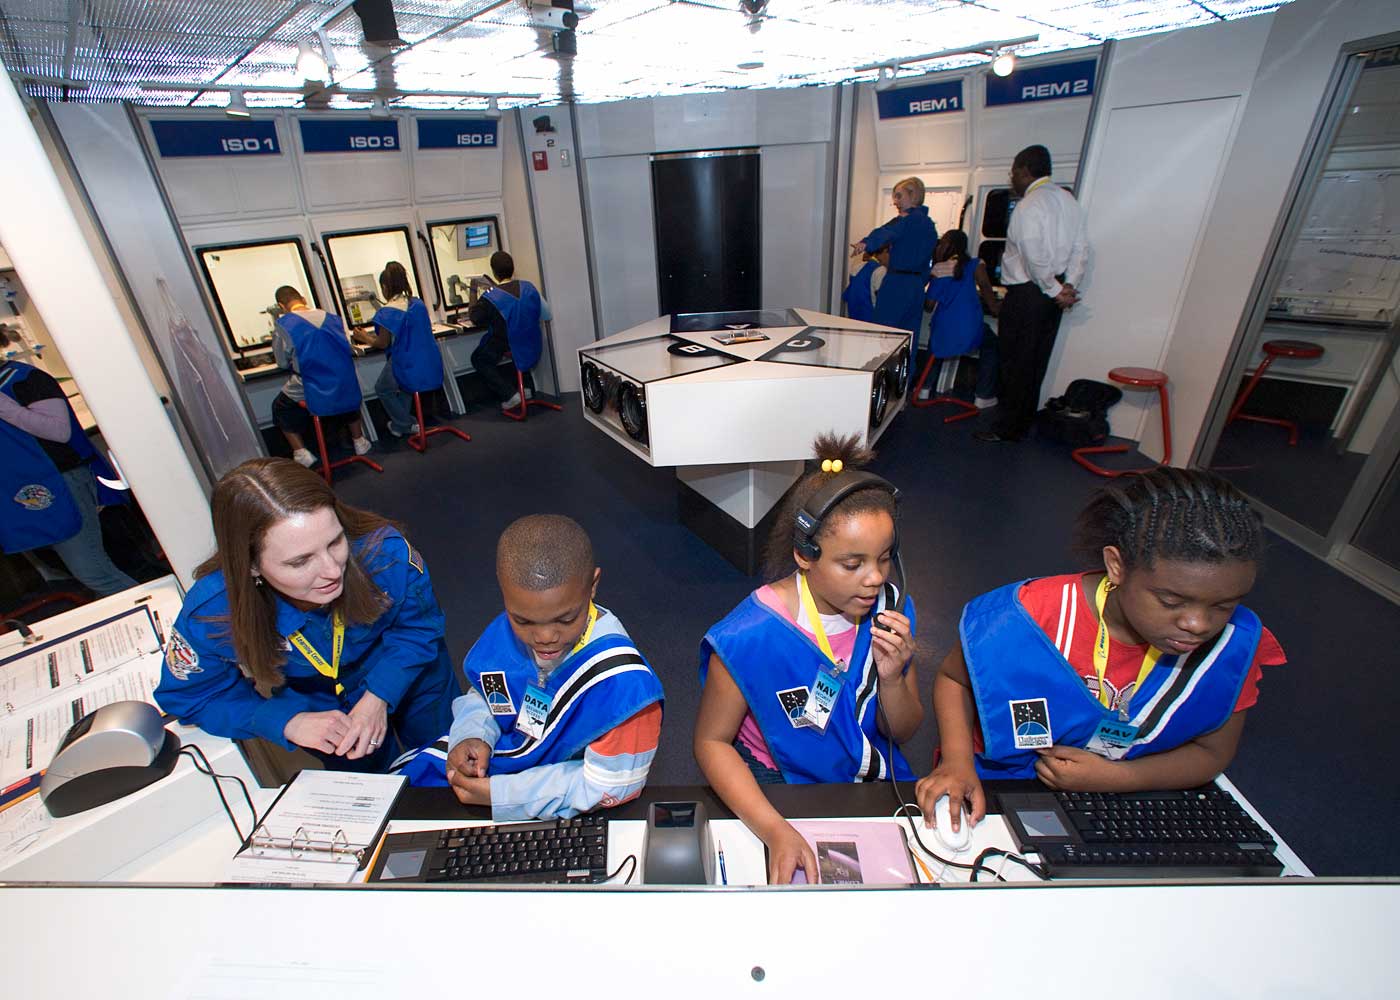 Group of children with instructor at mission control desk